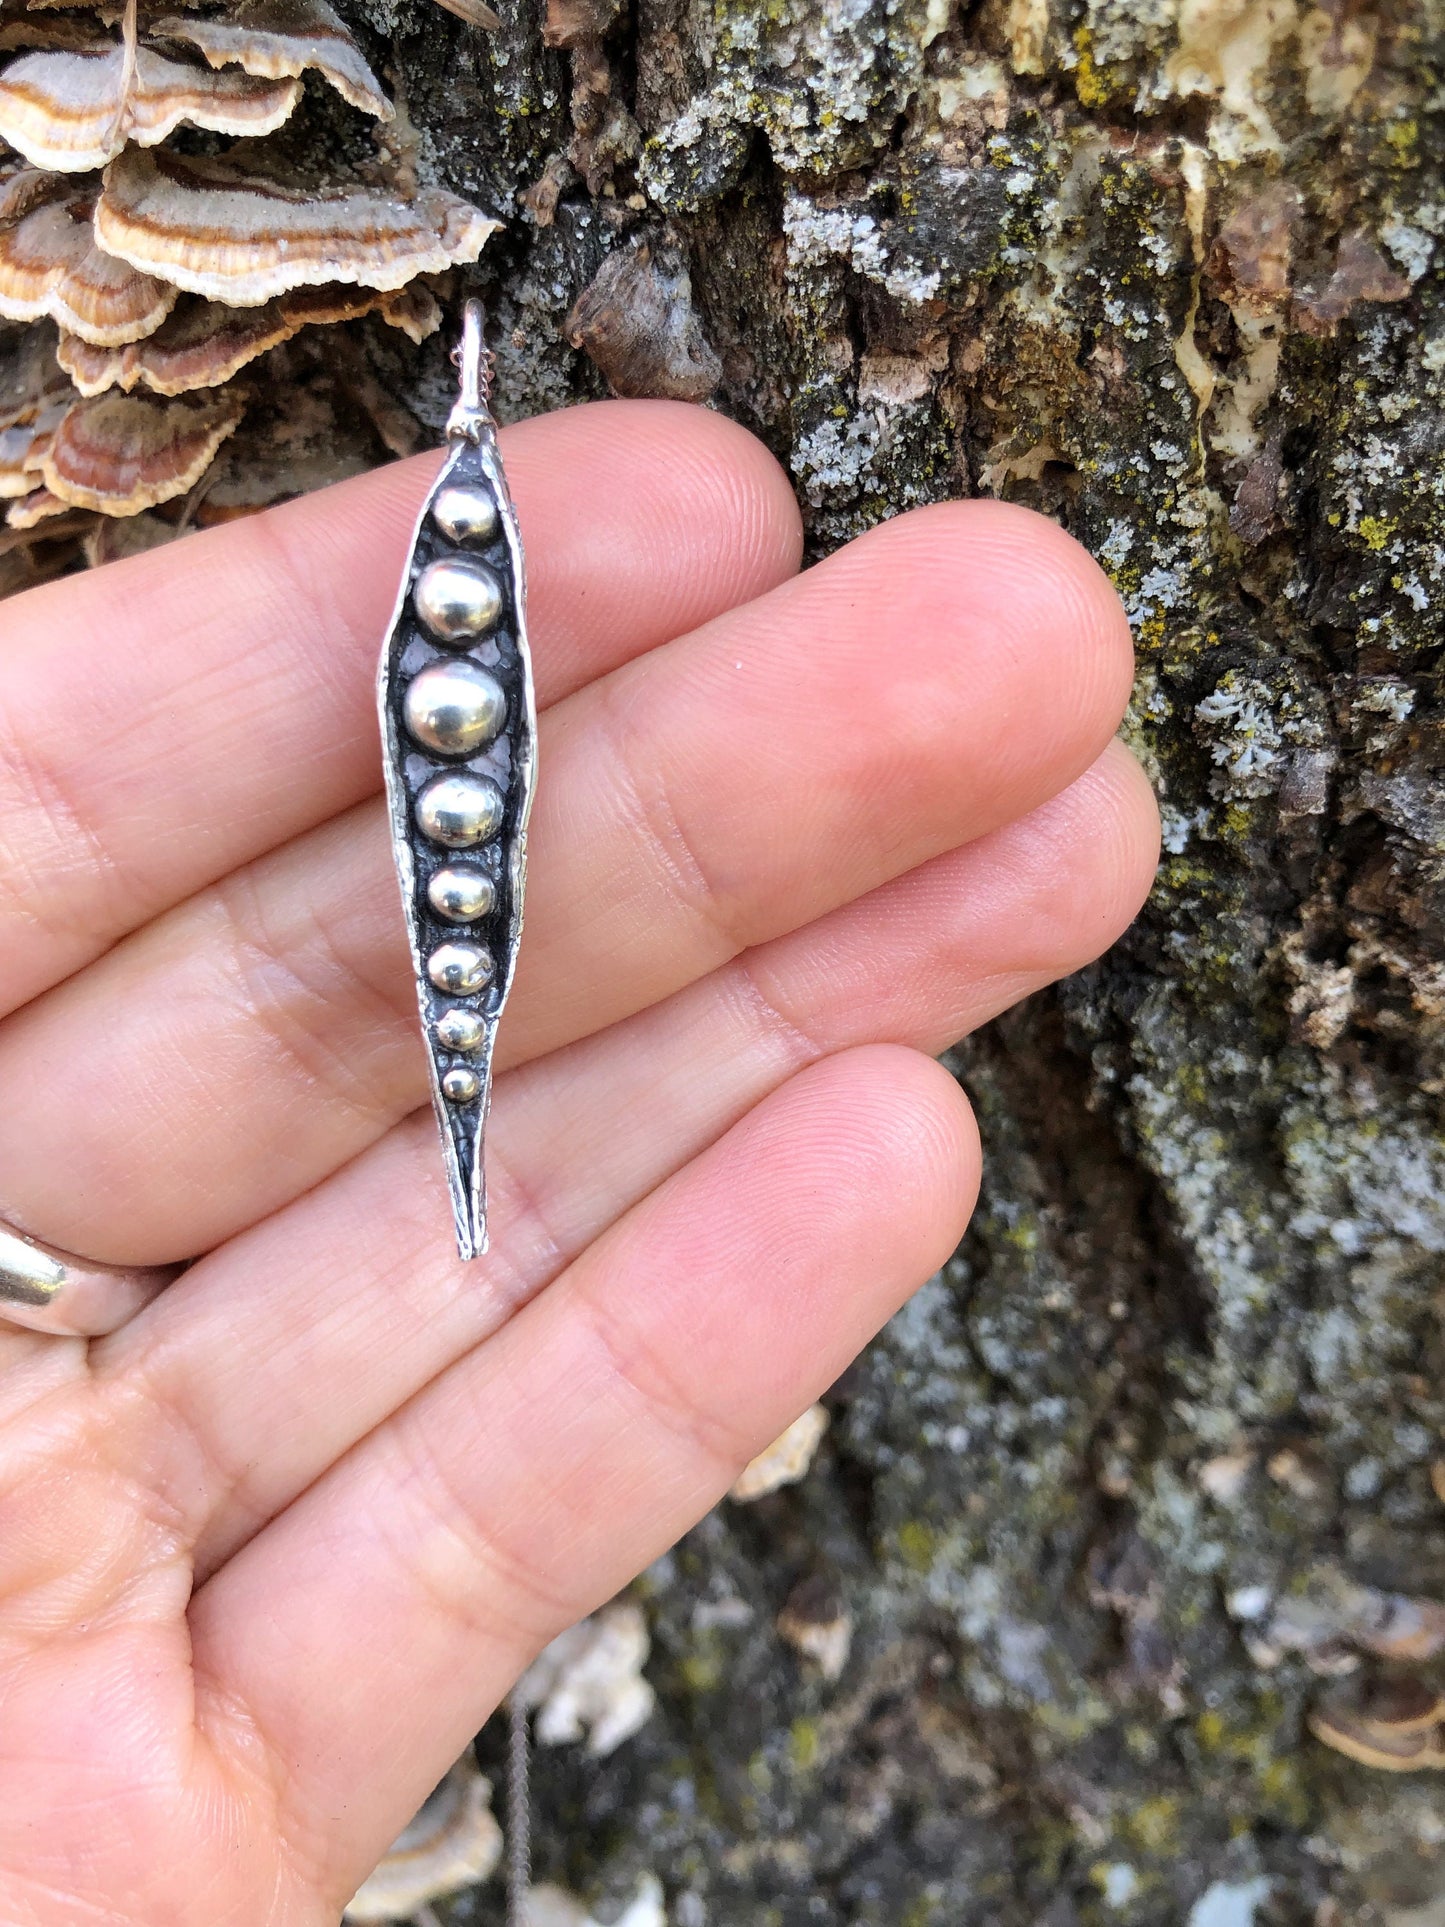 Organic textured, Sterling silver pea pod necklace, Handmade in Maine.